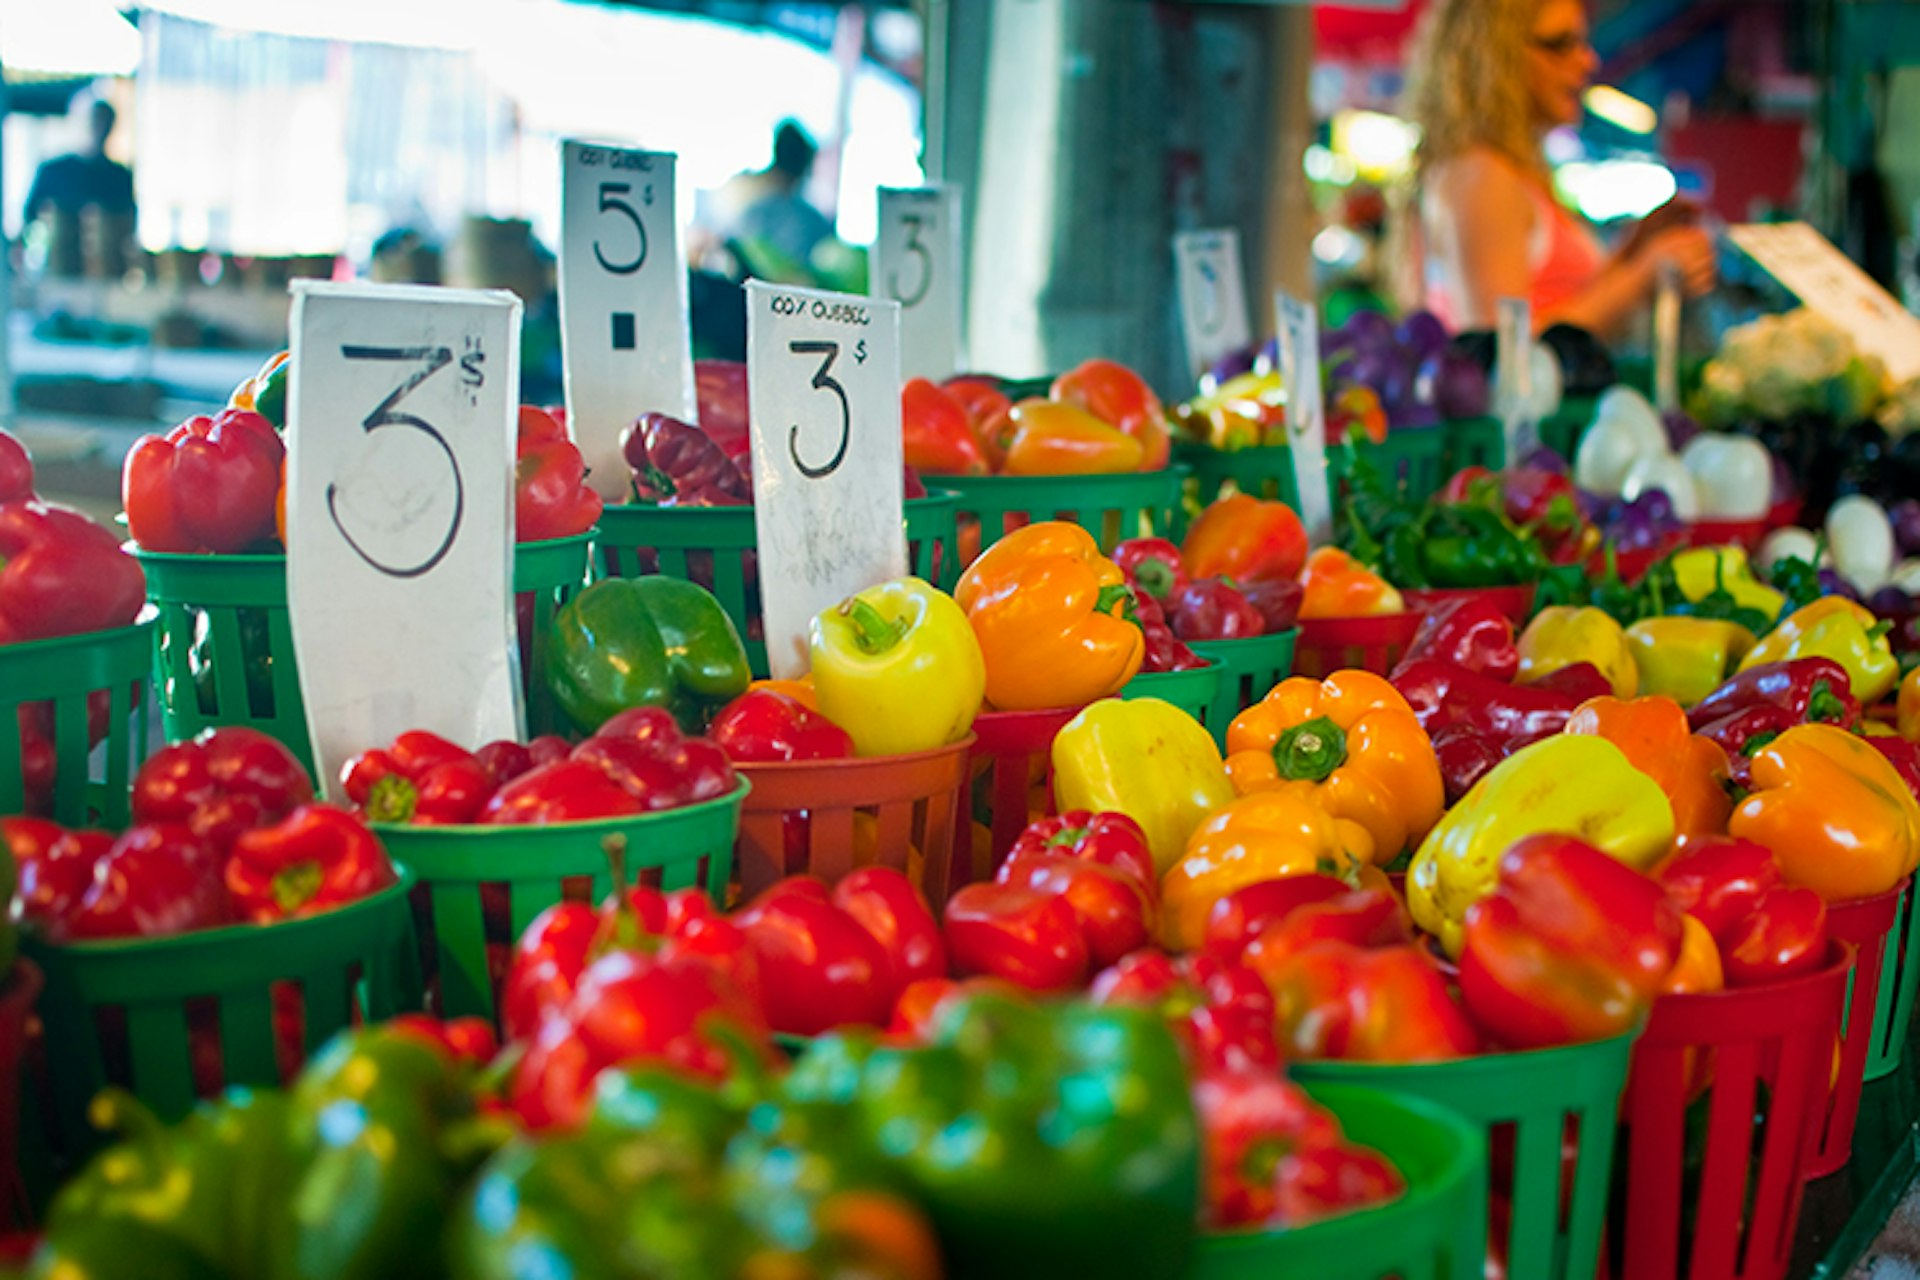 Peppers at Marché Jean Talon. Image by Brian Johnson & Dane Kantner / CC BY-SA 2.0